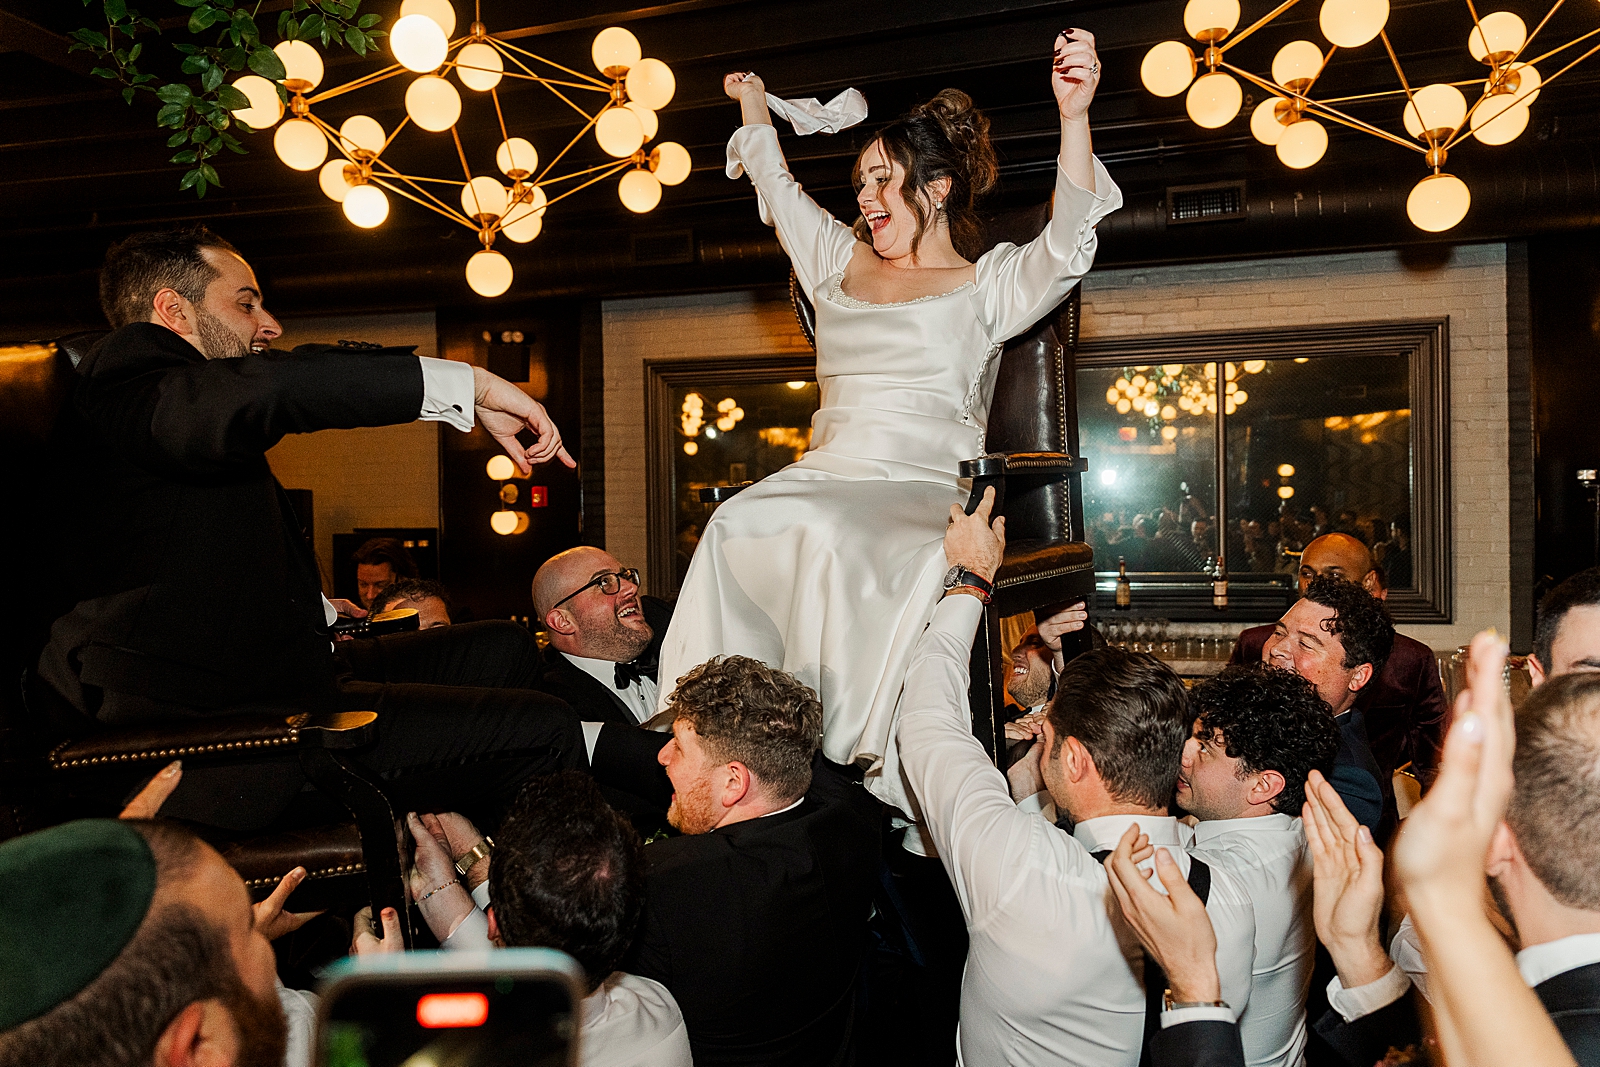 Shot of the Bride and Groom being lifted in chairs by their friends and family during the Hora. 